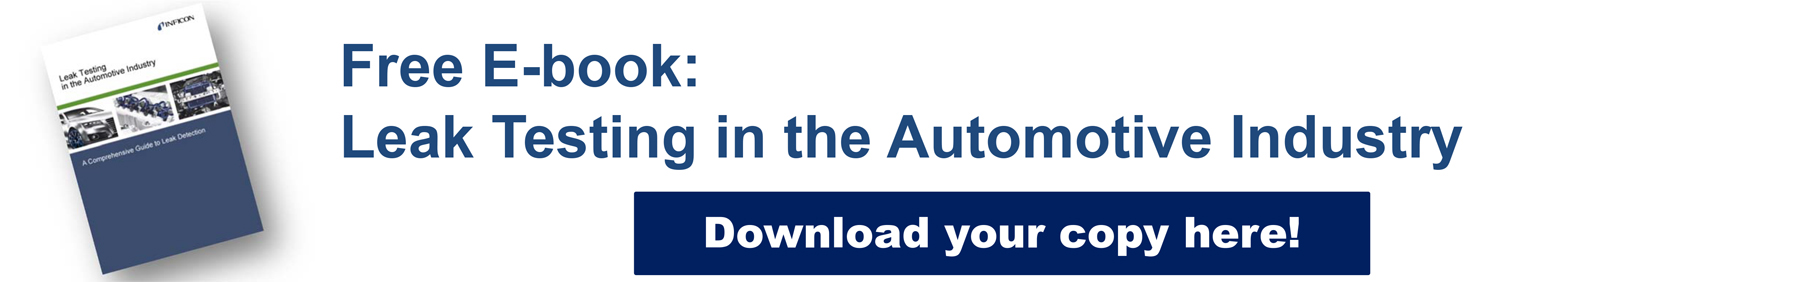 Free E-book: Leak Testing in the Automotive Industry. Download your copy here!